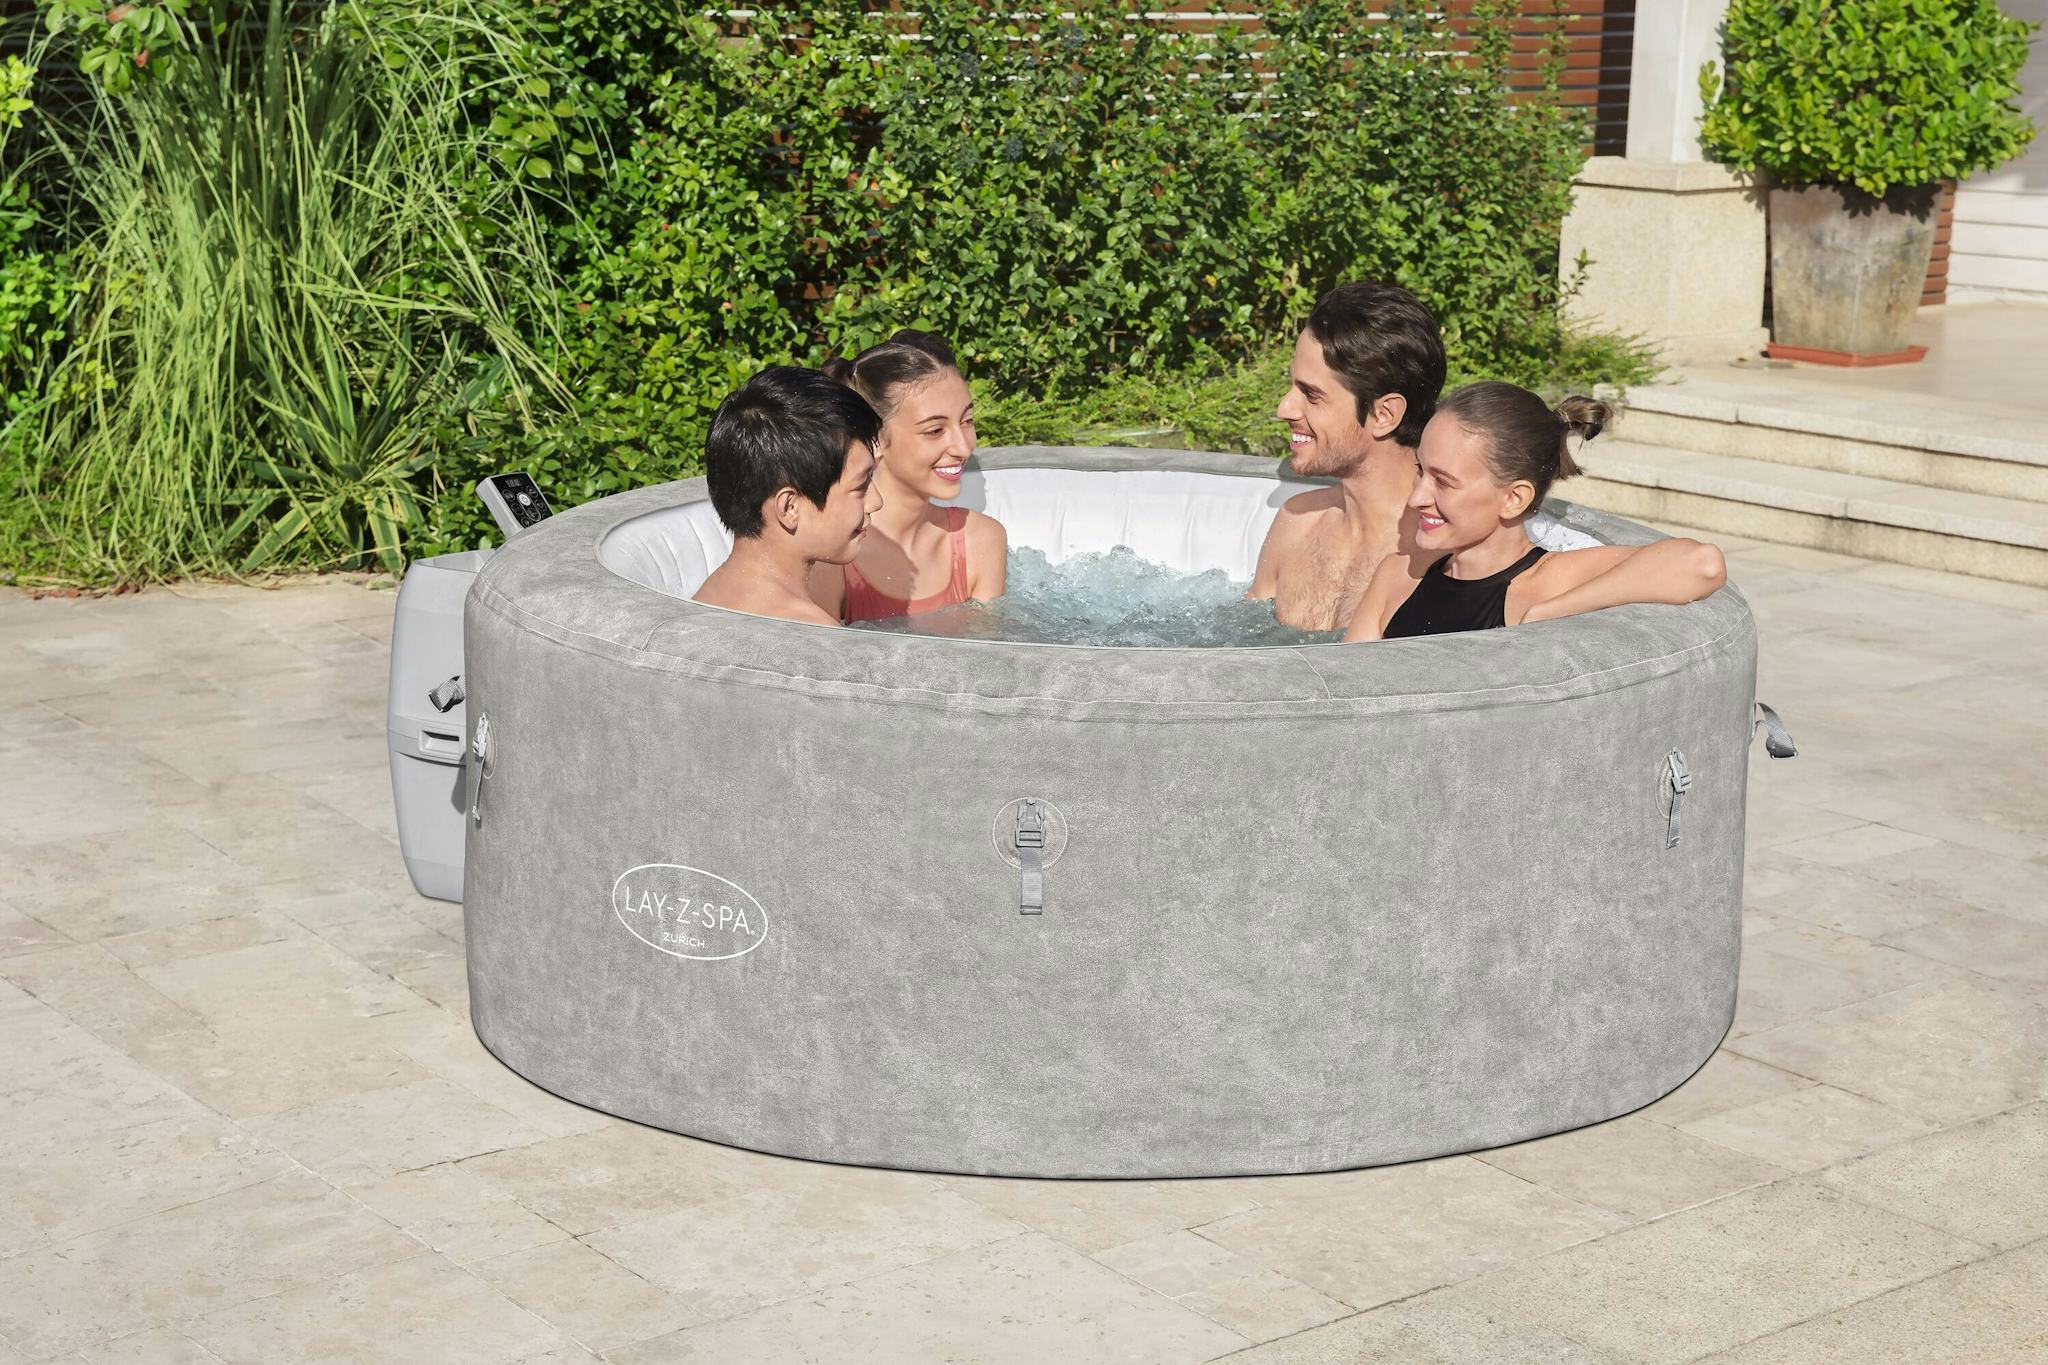 Spas Gonflables Spa gonflable rond Lay-Z-Spa Zurich Airjet™ 2 - 4 personnes Bestway 3